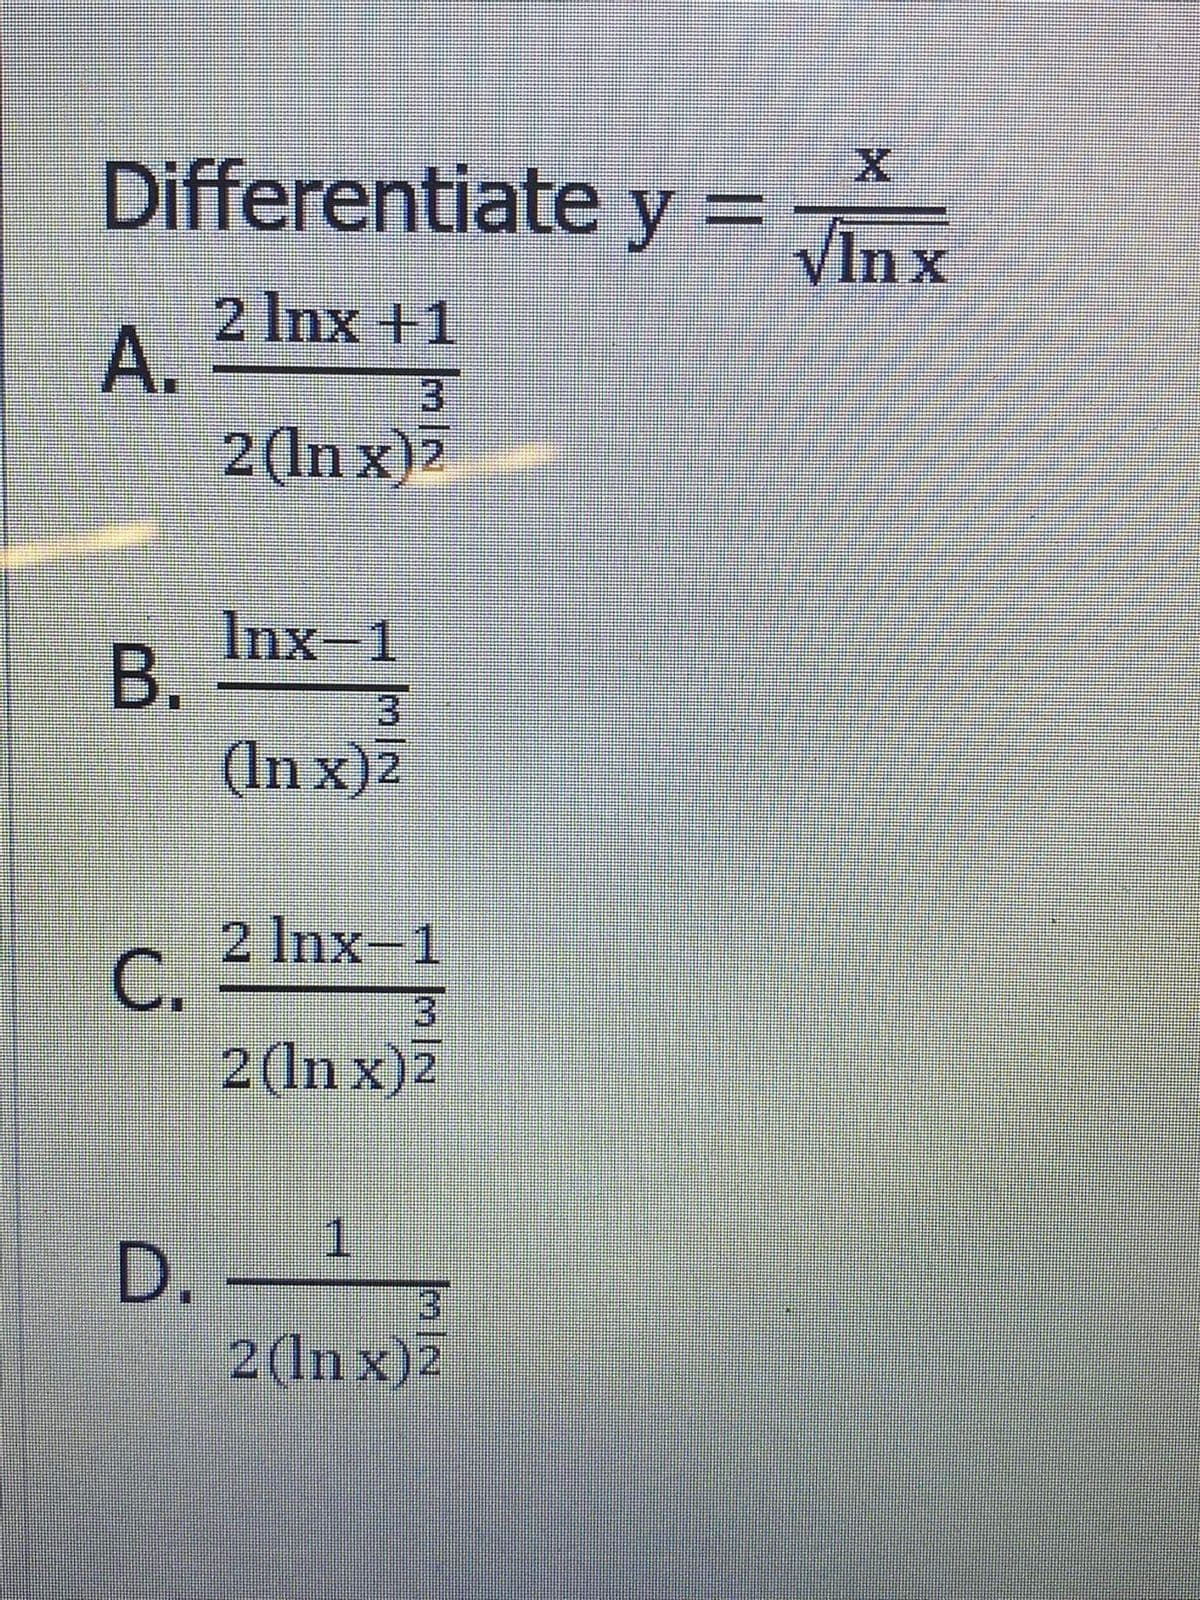 Differentiate y =
VIn x
2 Inx +1
A.
2(In x)2
3.
Inx-1
3
(In x)2
2 Inx-1
C.
2(In x)2
13
1.
D.
3)
2(In x)2
B.
